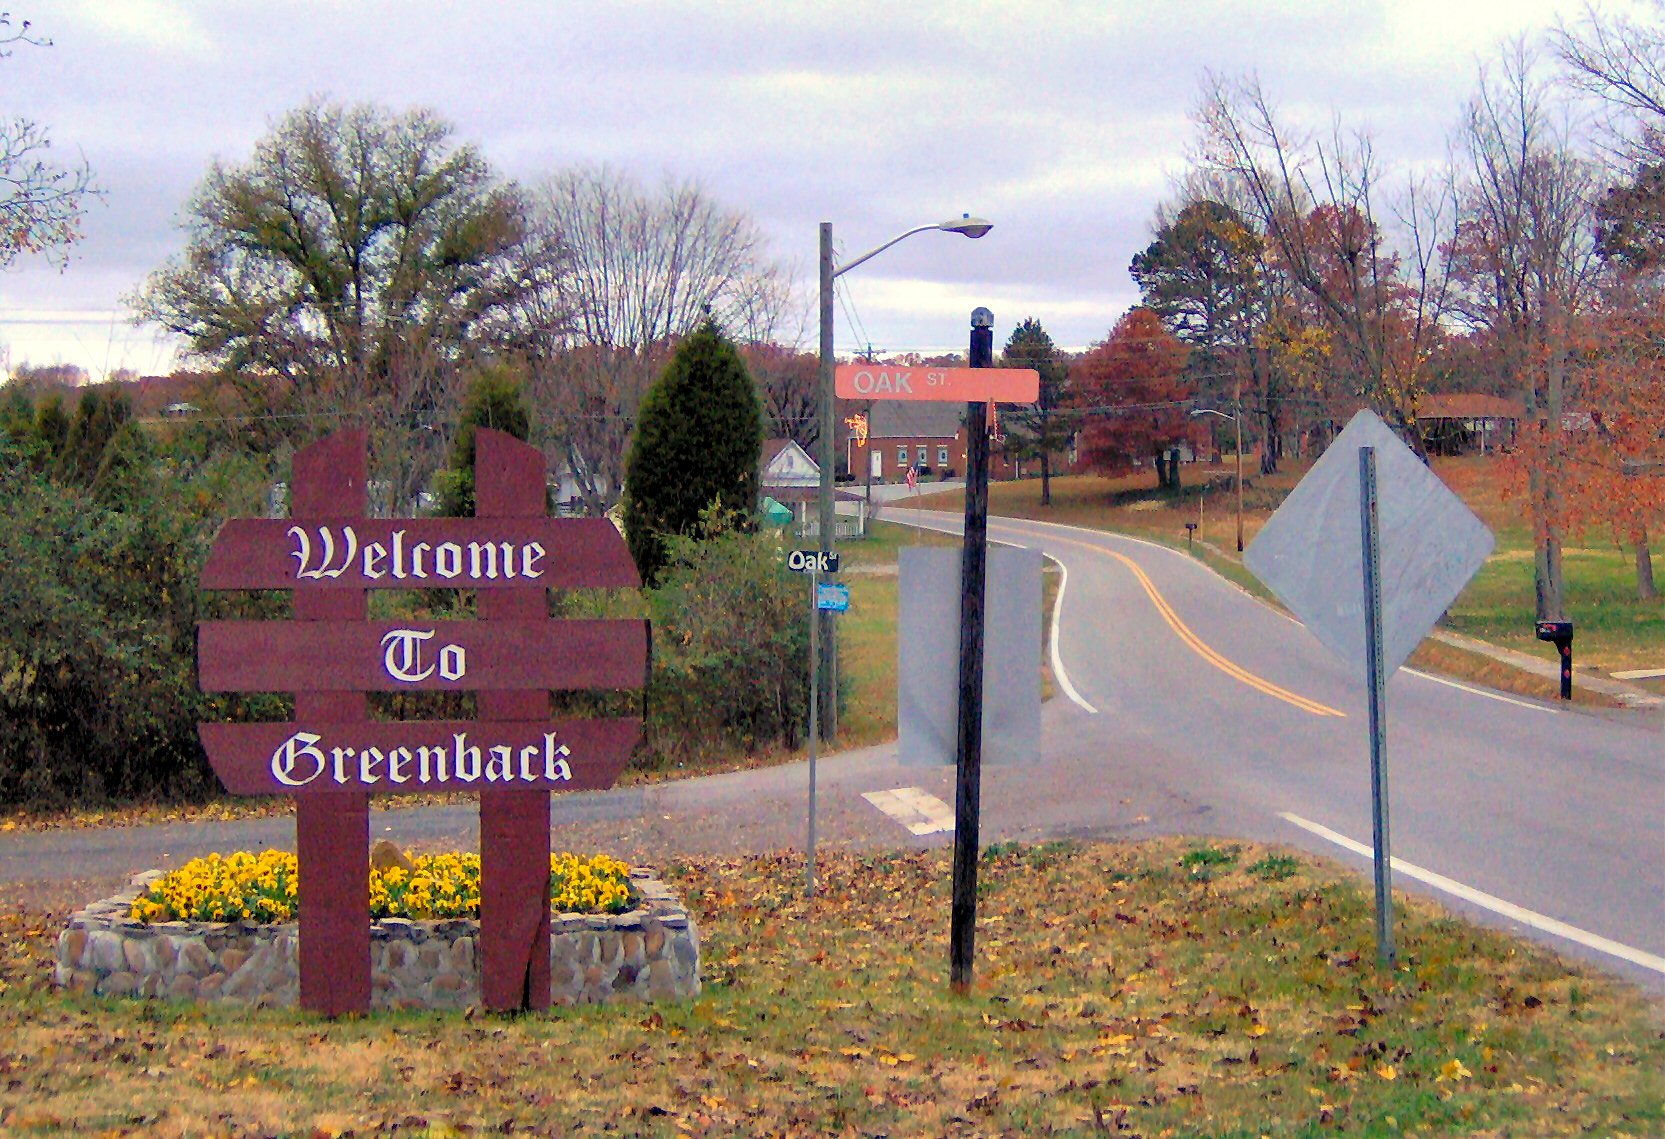 welcome to greenback sign located downtown.